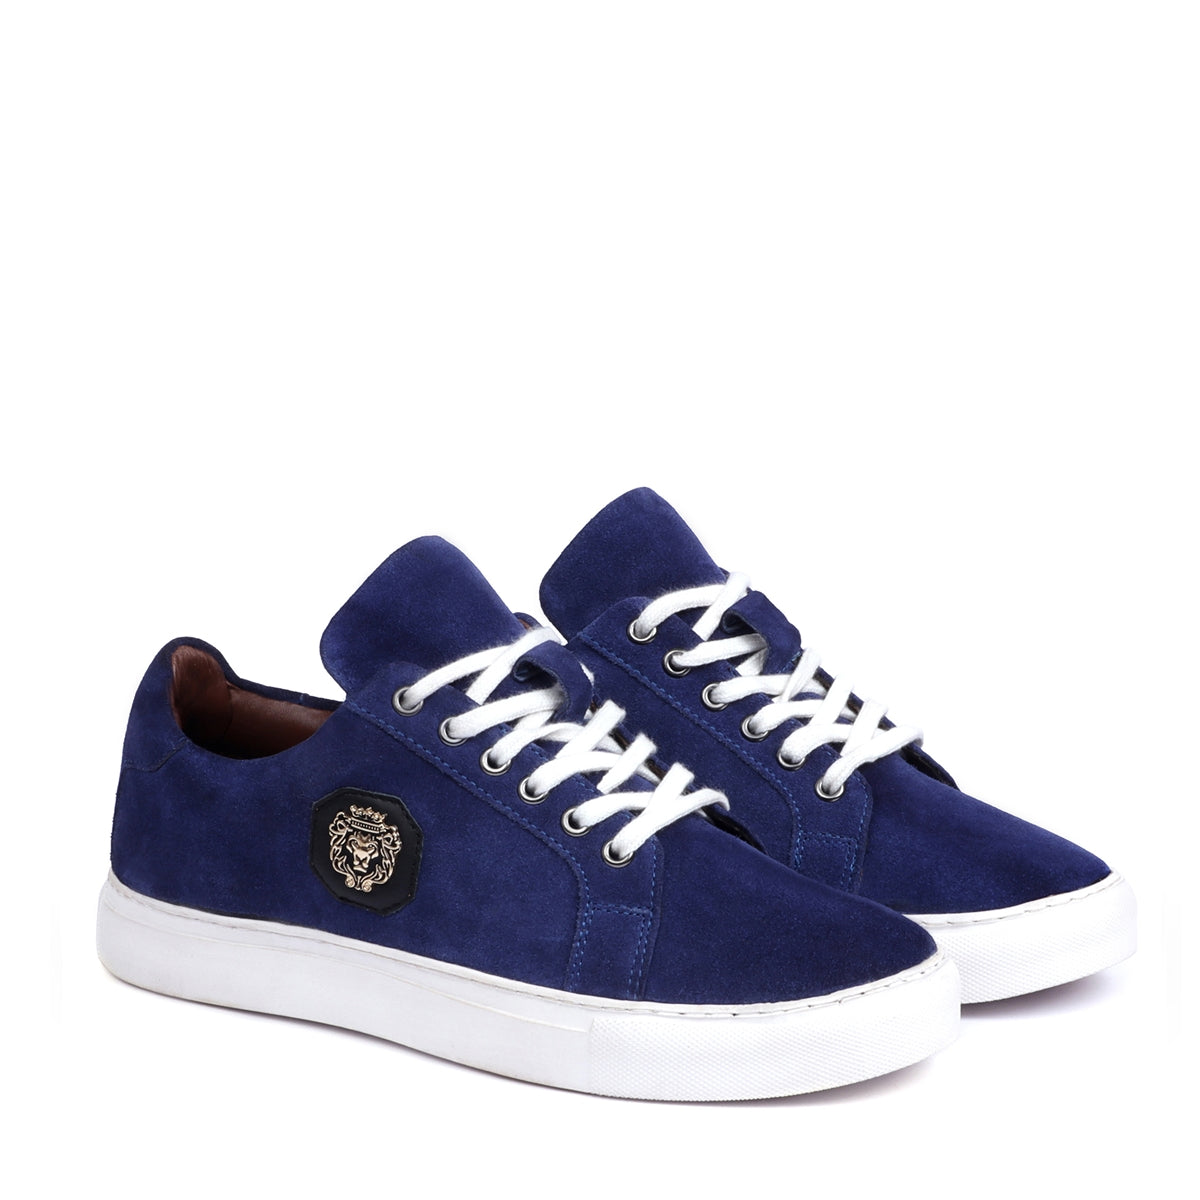 Blue Suede Leather Low Top Sneaker with White Sole